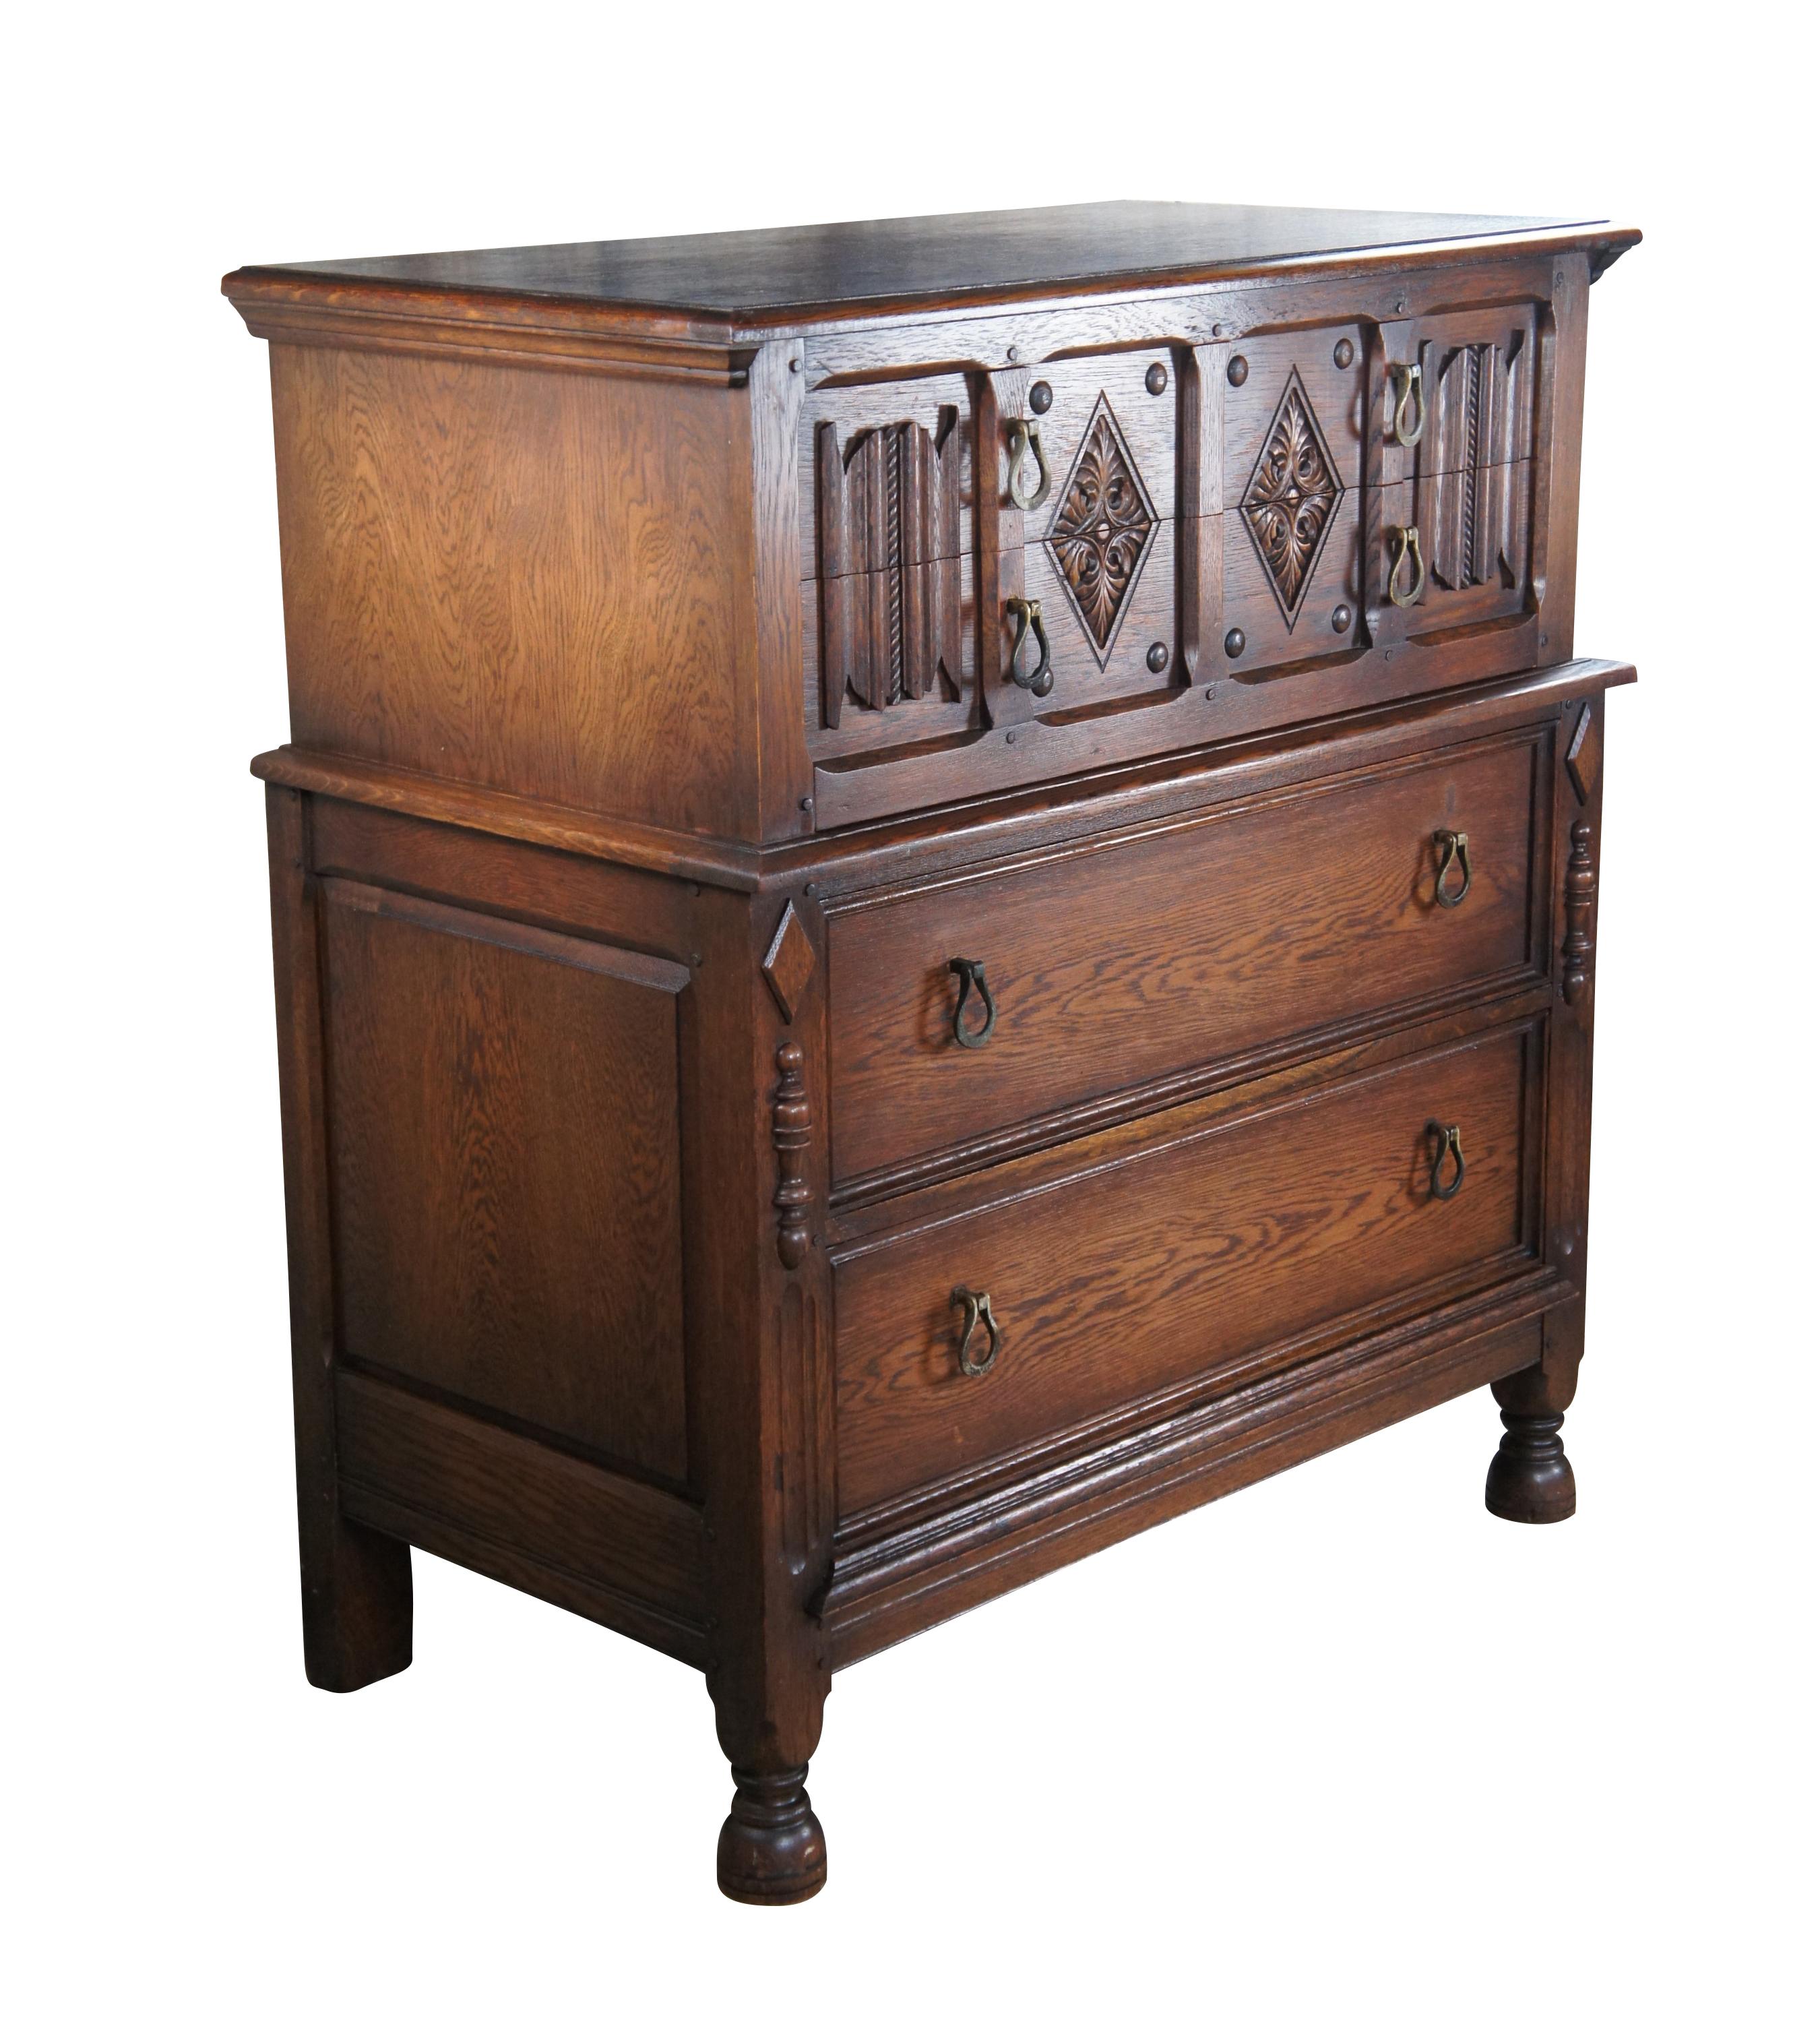 An impressive Spanish Revival chest of drawers by Saginaw Furniture, circa late 1930s to early 40s. Made from oak with four dovetailed drawers.  Features  a rectangular frame with intriguing linen fold and diamond pattern canthus carved accents. 